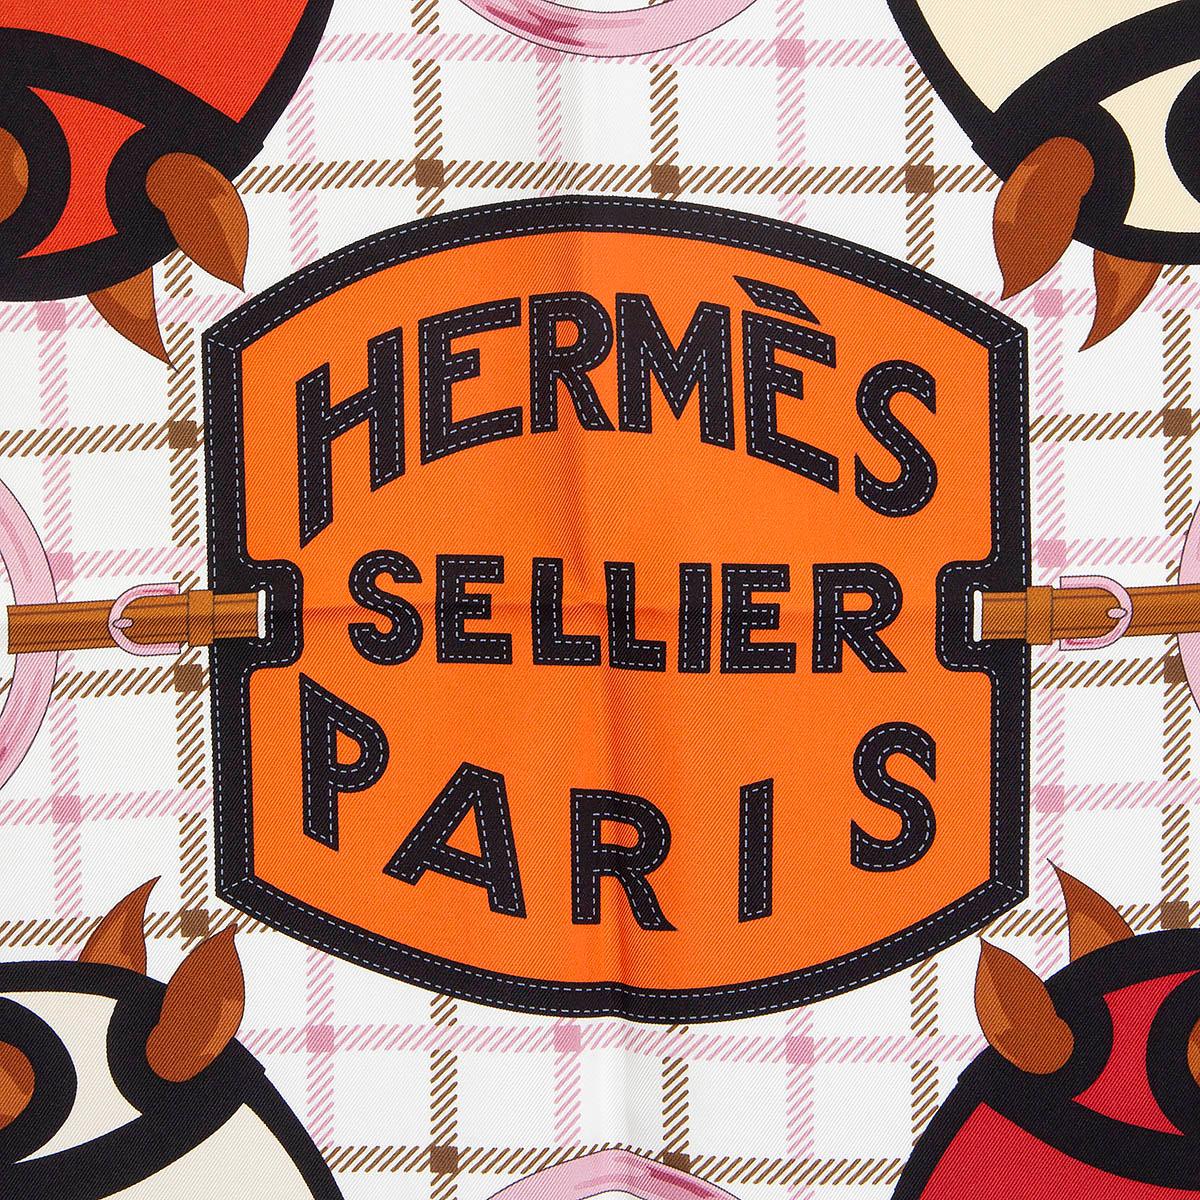 100% authentic Hermès Tatersale 90 scarf by Herni d'Origny in white silk twill (100%) with details in apricot, black and brown. Has a barely visible stain at the border, otherwise in excellent condition.

Issued 2014, First issue